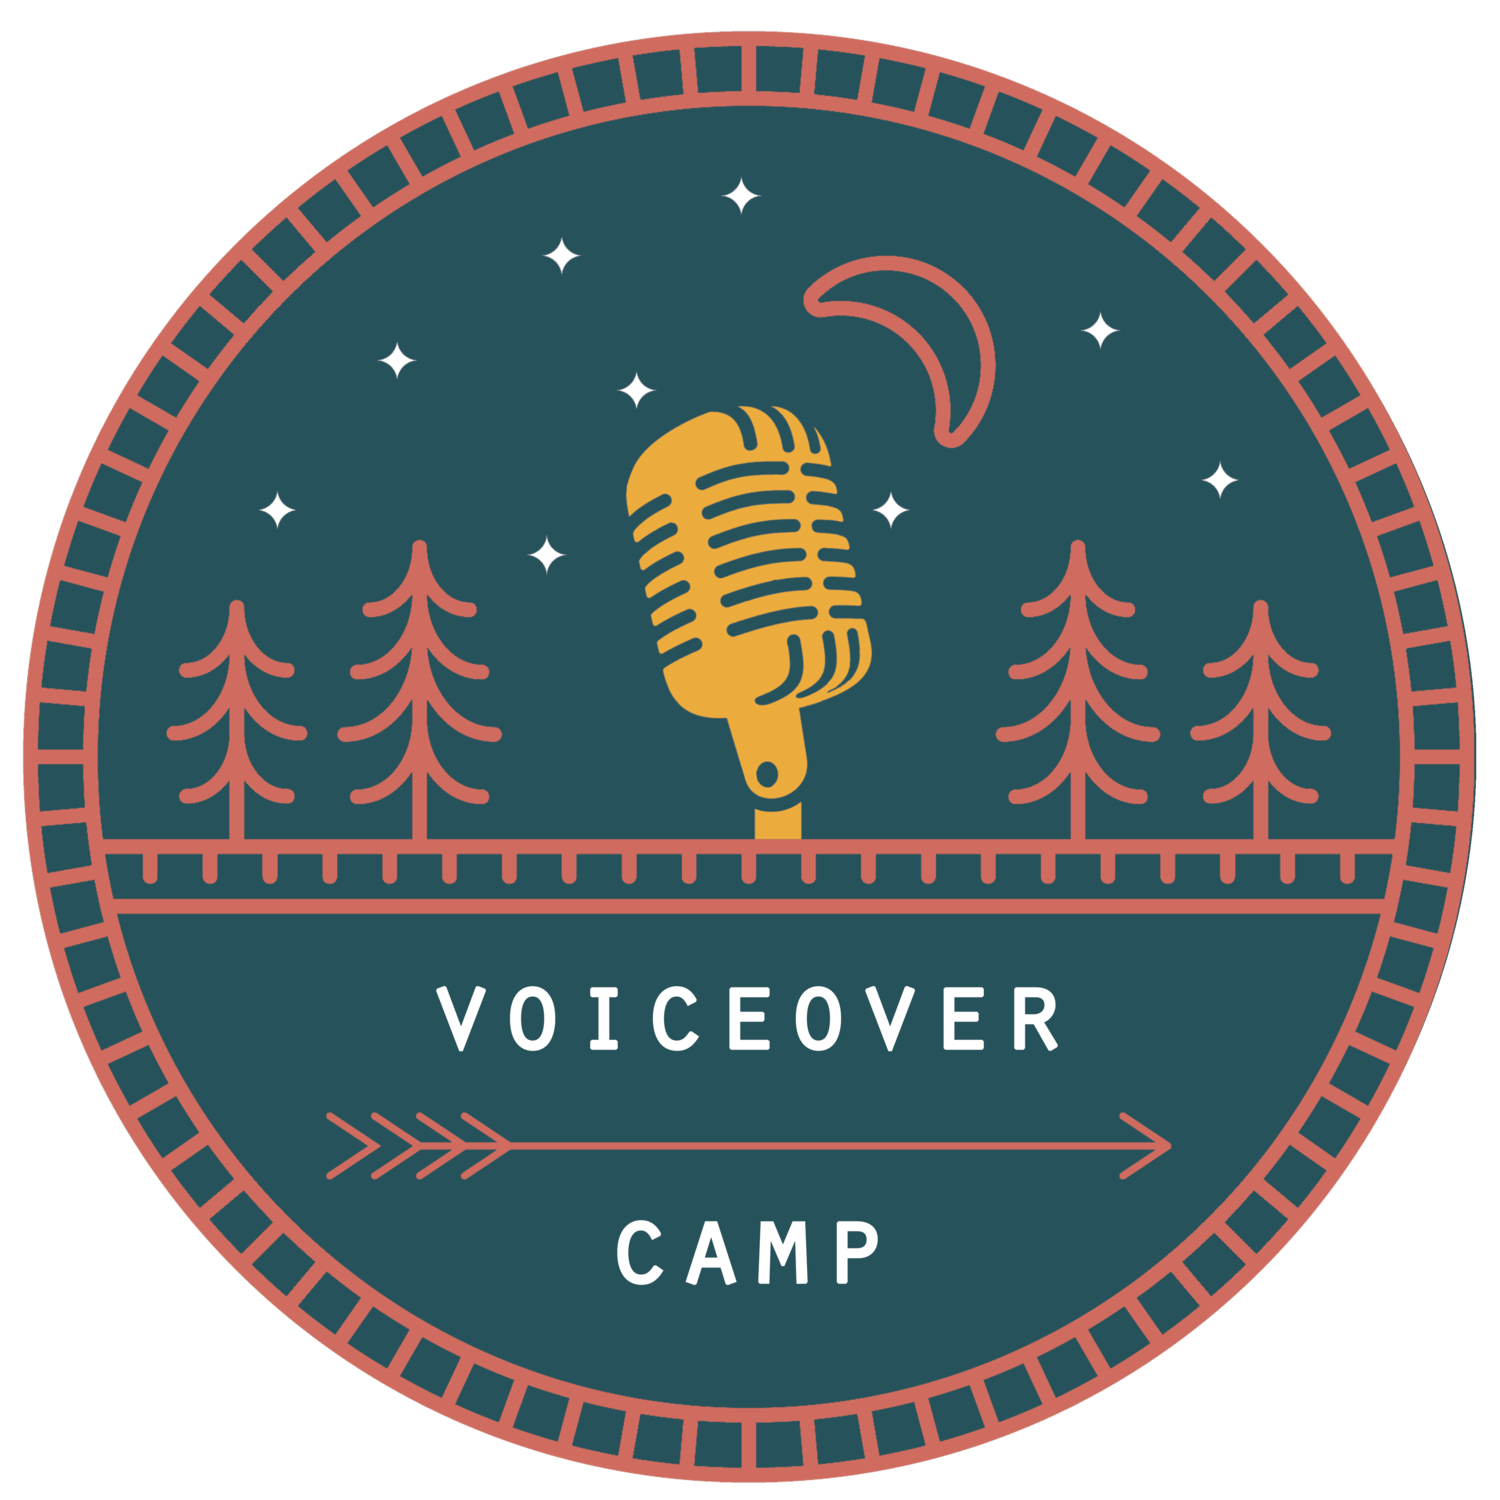 Voiceover Camp